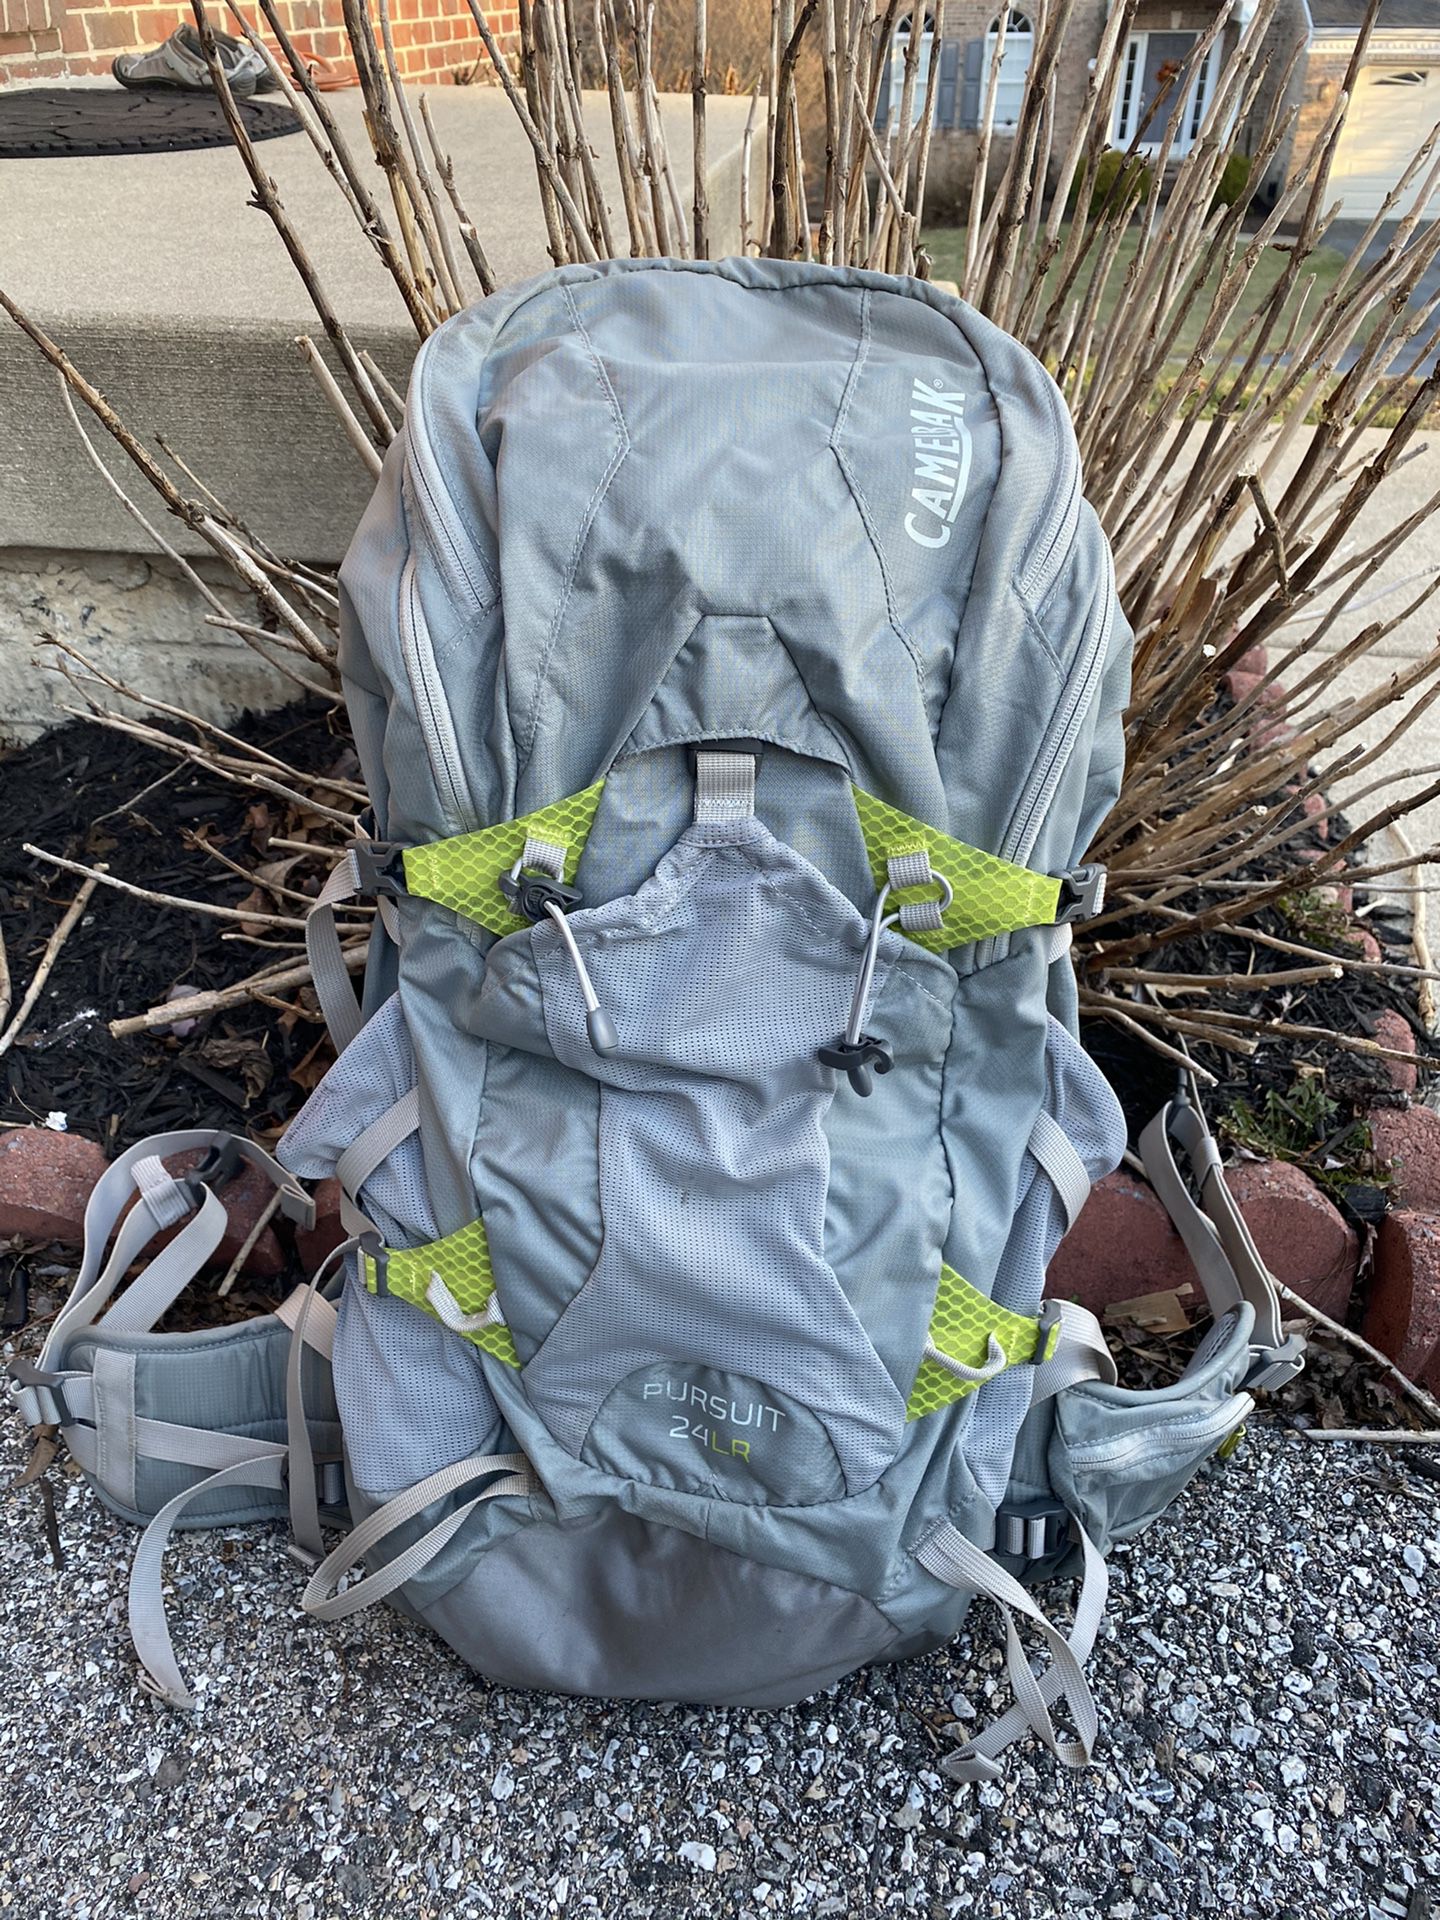 Hiking backpack(Practically new. Very high quality and brand . Flawlessly condition. Super clean inside and out)